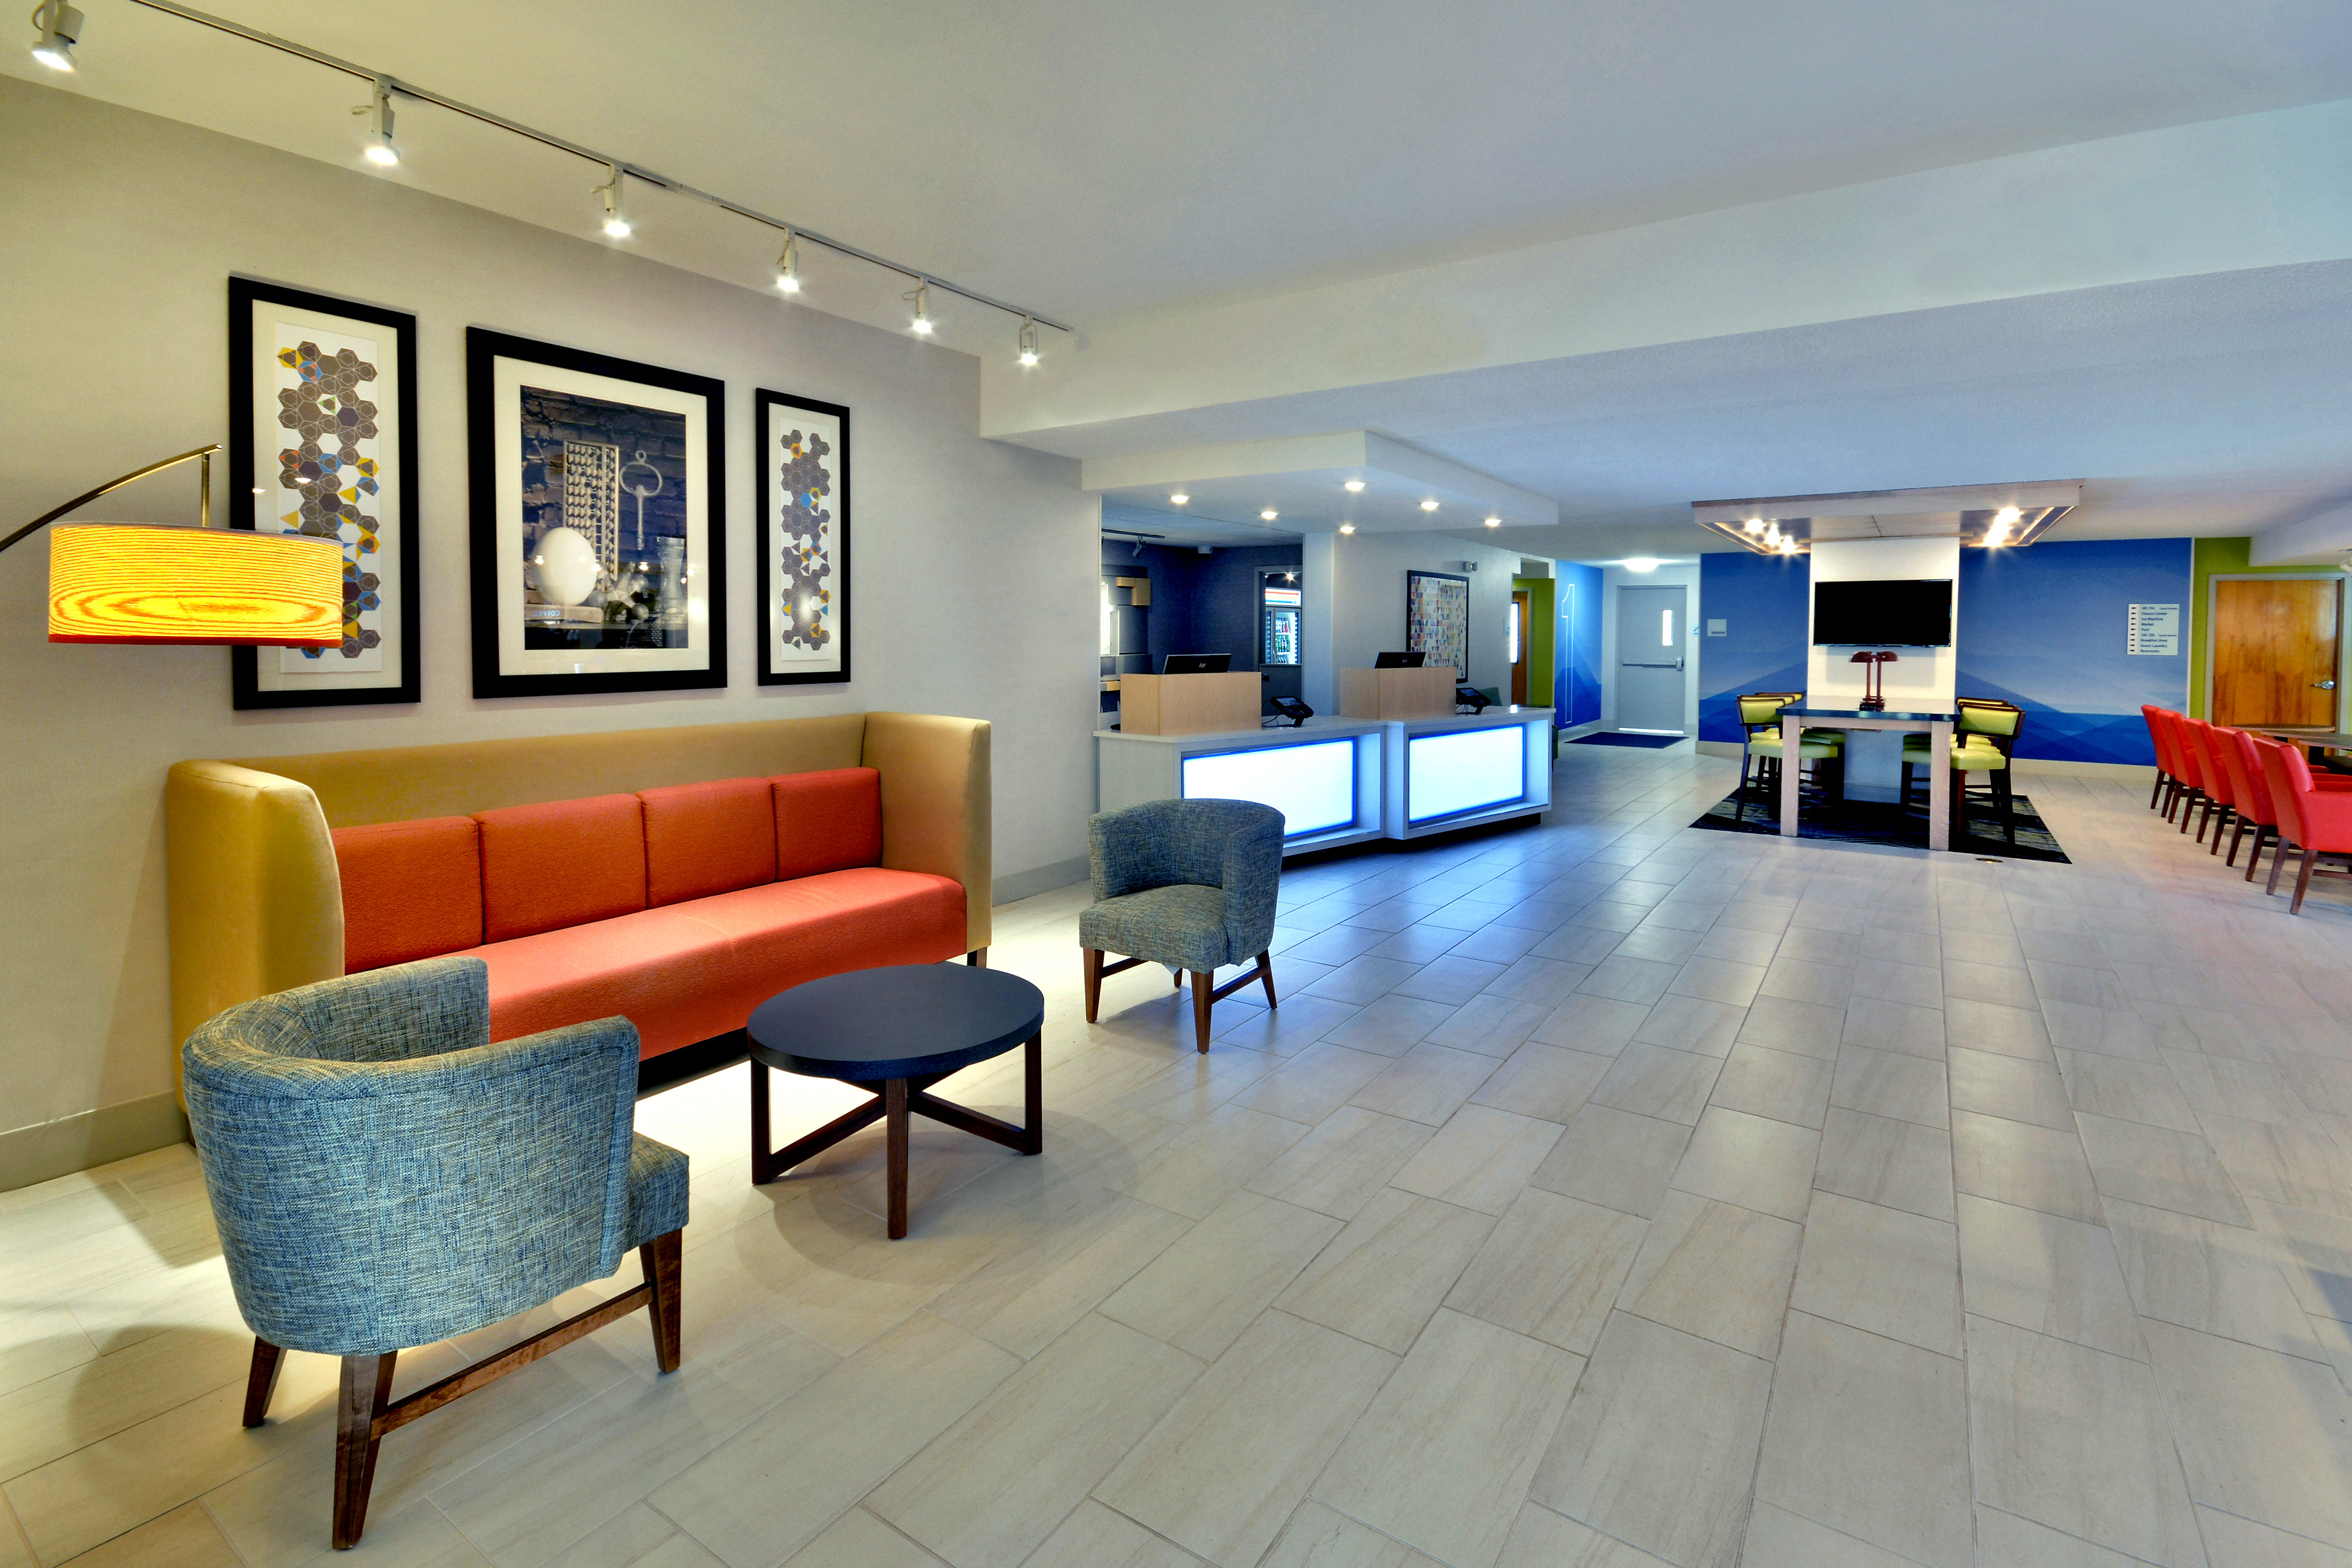 Our bright and spacious lobby welcomes all our guests to Danville.